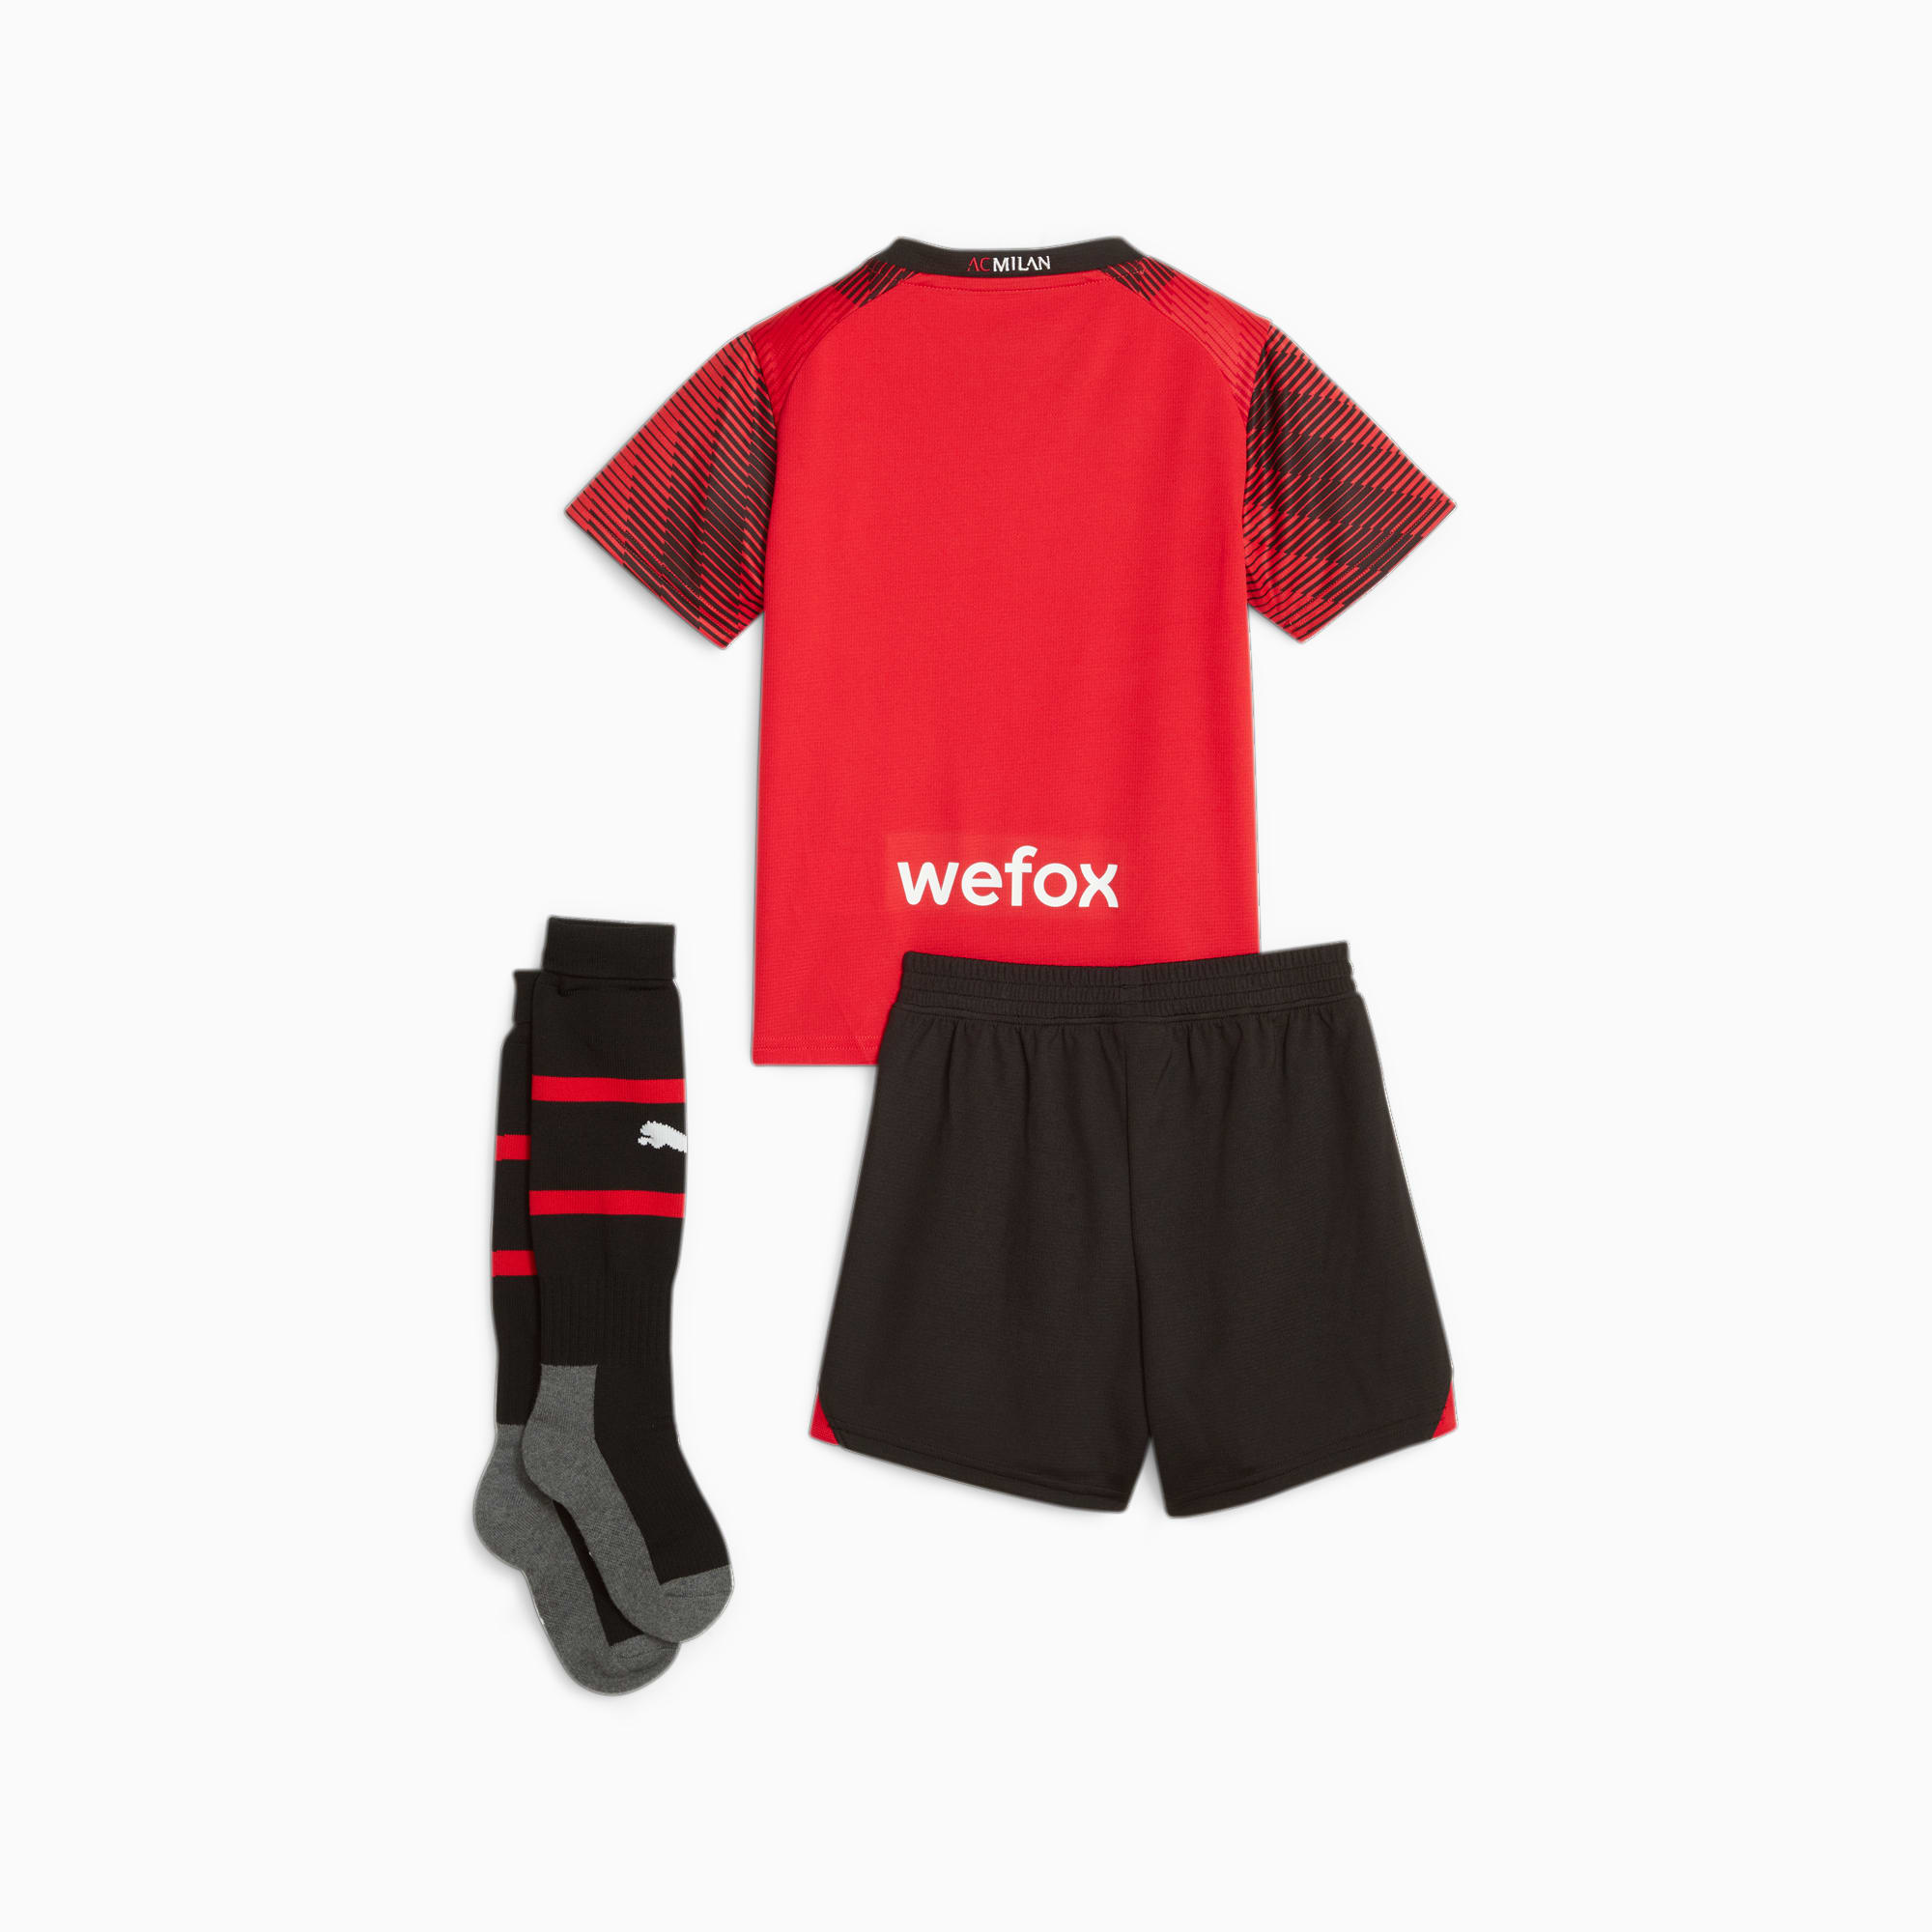 PUMA A.C. Milan 23/24 Home Mini Kit, For All Time Red/Black